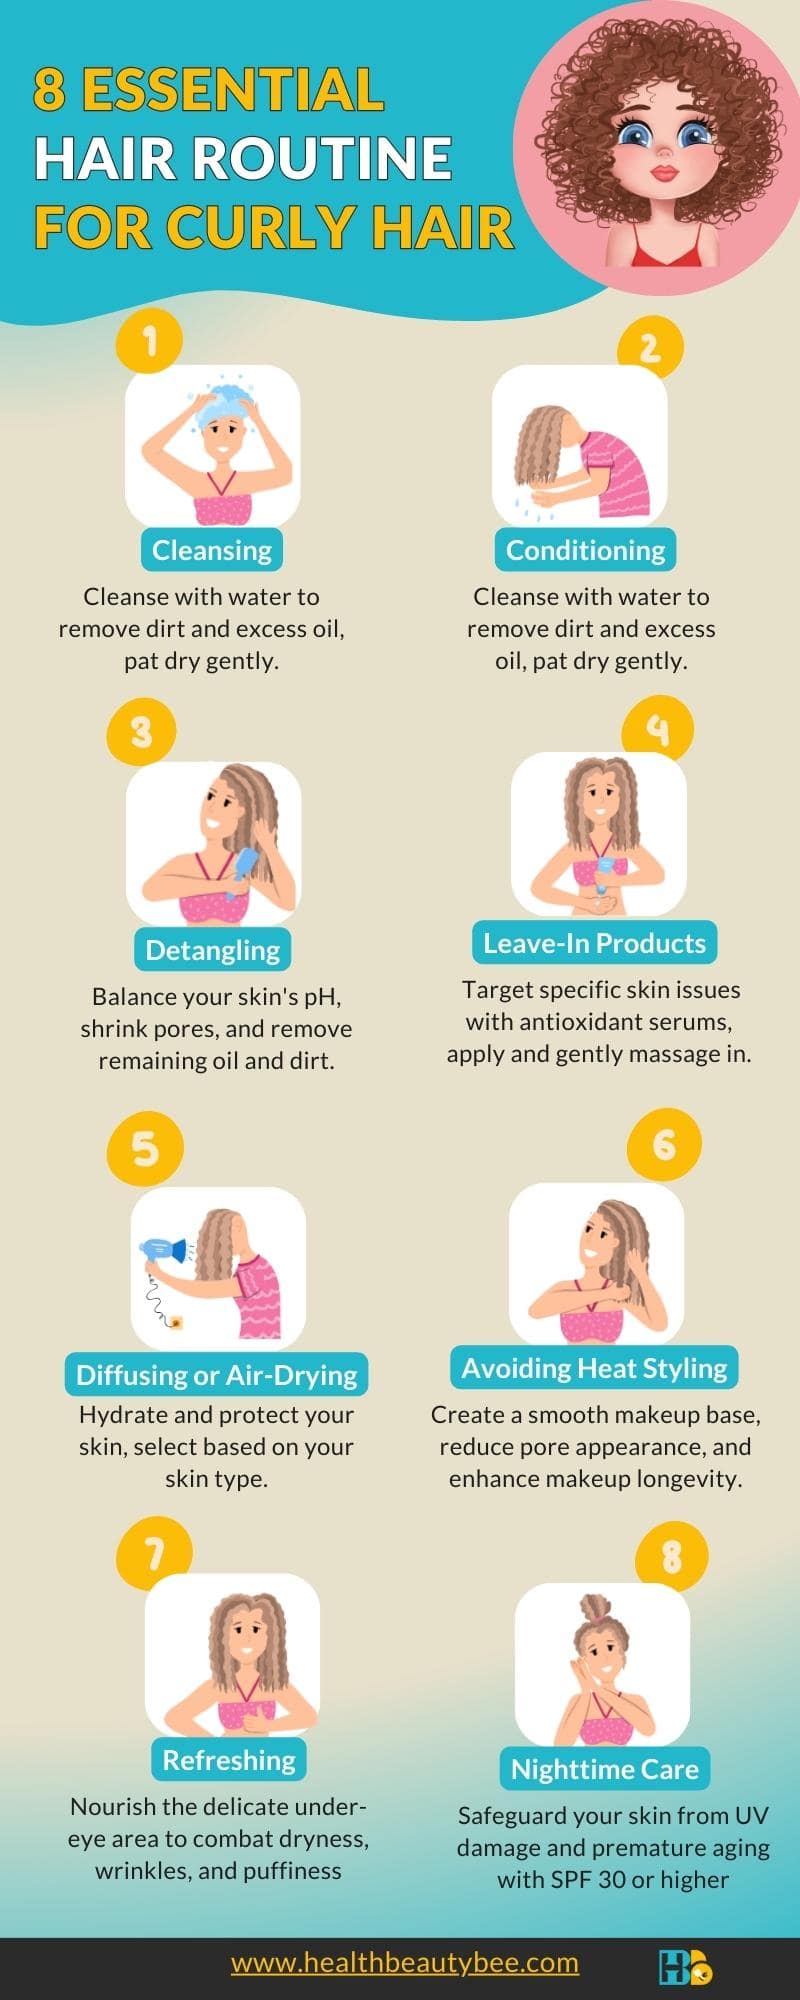 8 Essential Hair Routine for Curly Wavy Hair Healthbeautybee infographic